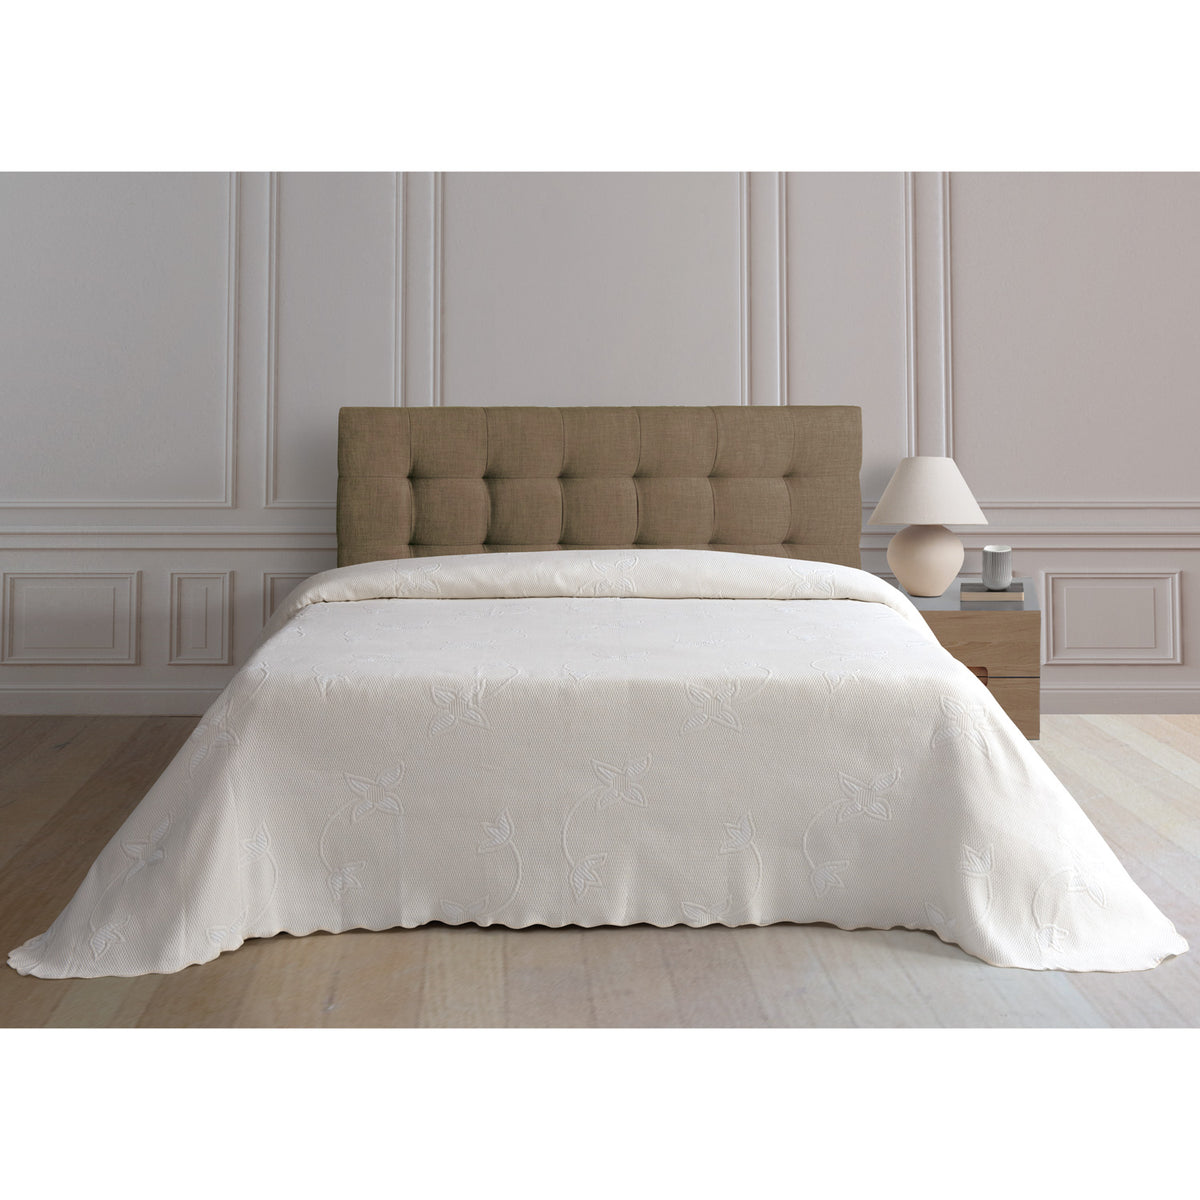 Caprice Bedspread - Double - Champagne